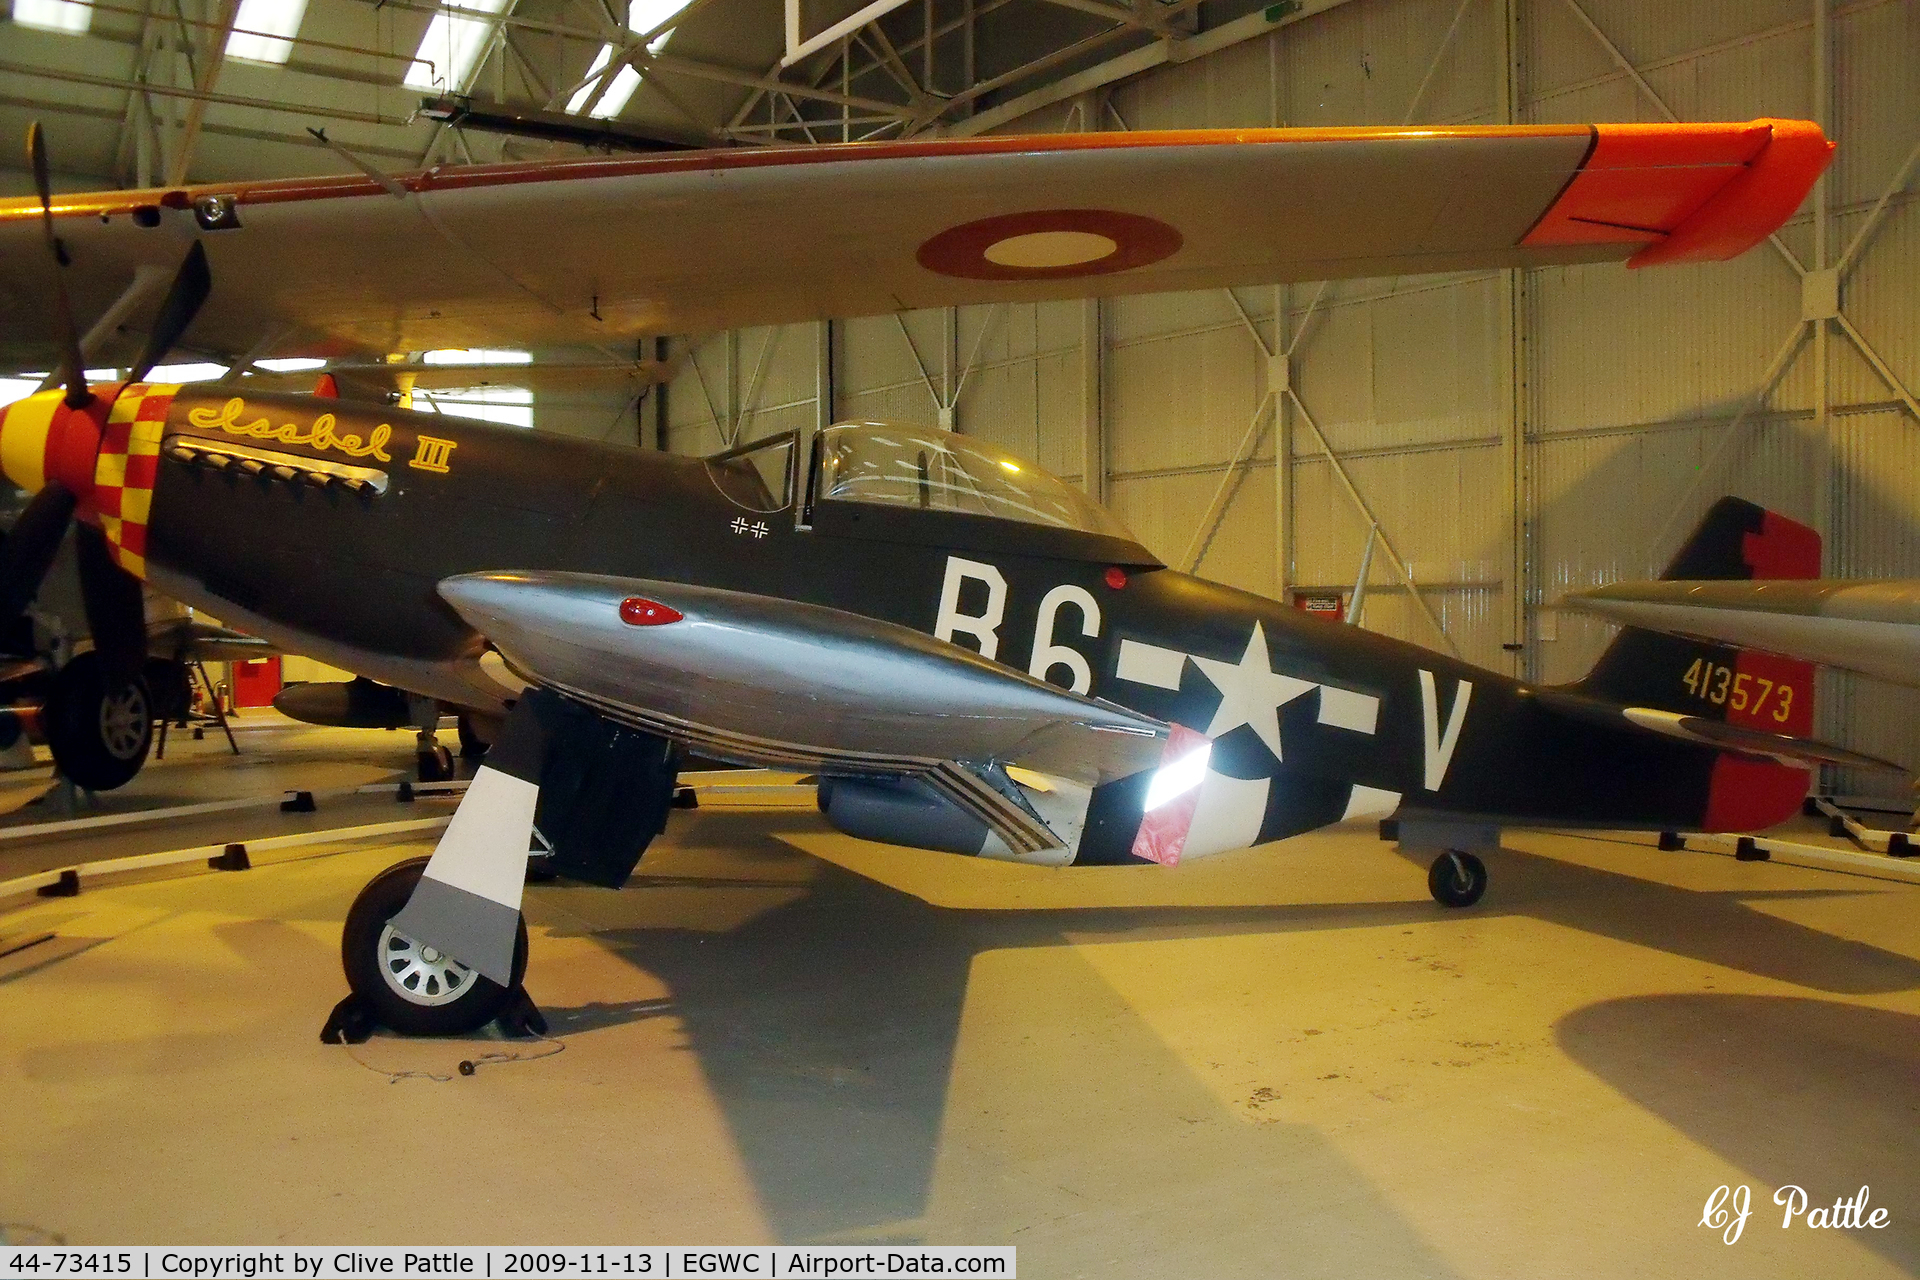 44-73415, 1945 North American P-51D Mustang C/N 122-39874, Preserved within the Royal Air Museum at RAF Cosford EGWC. This is a composite aircraft, the bulk of which is really serialled 44-73415